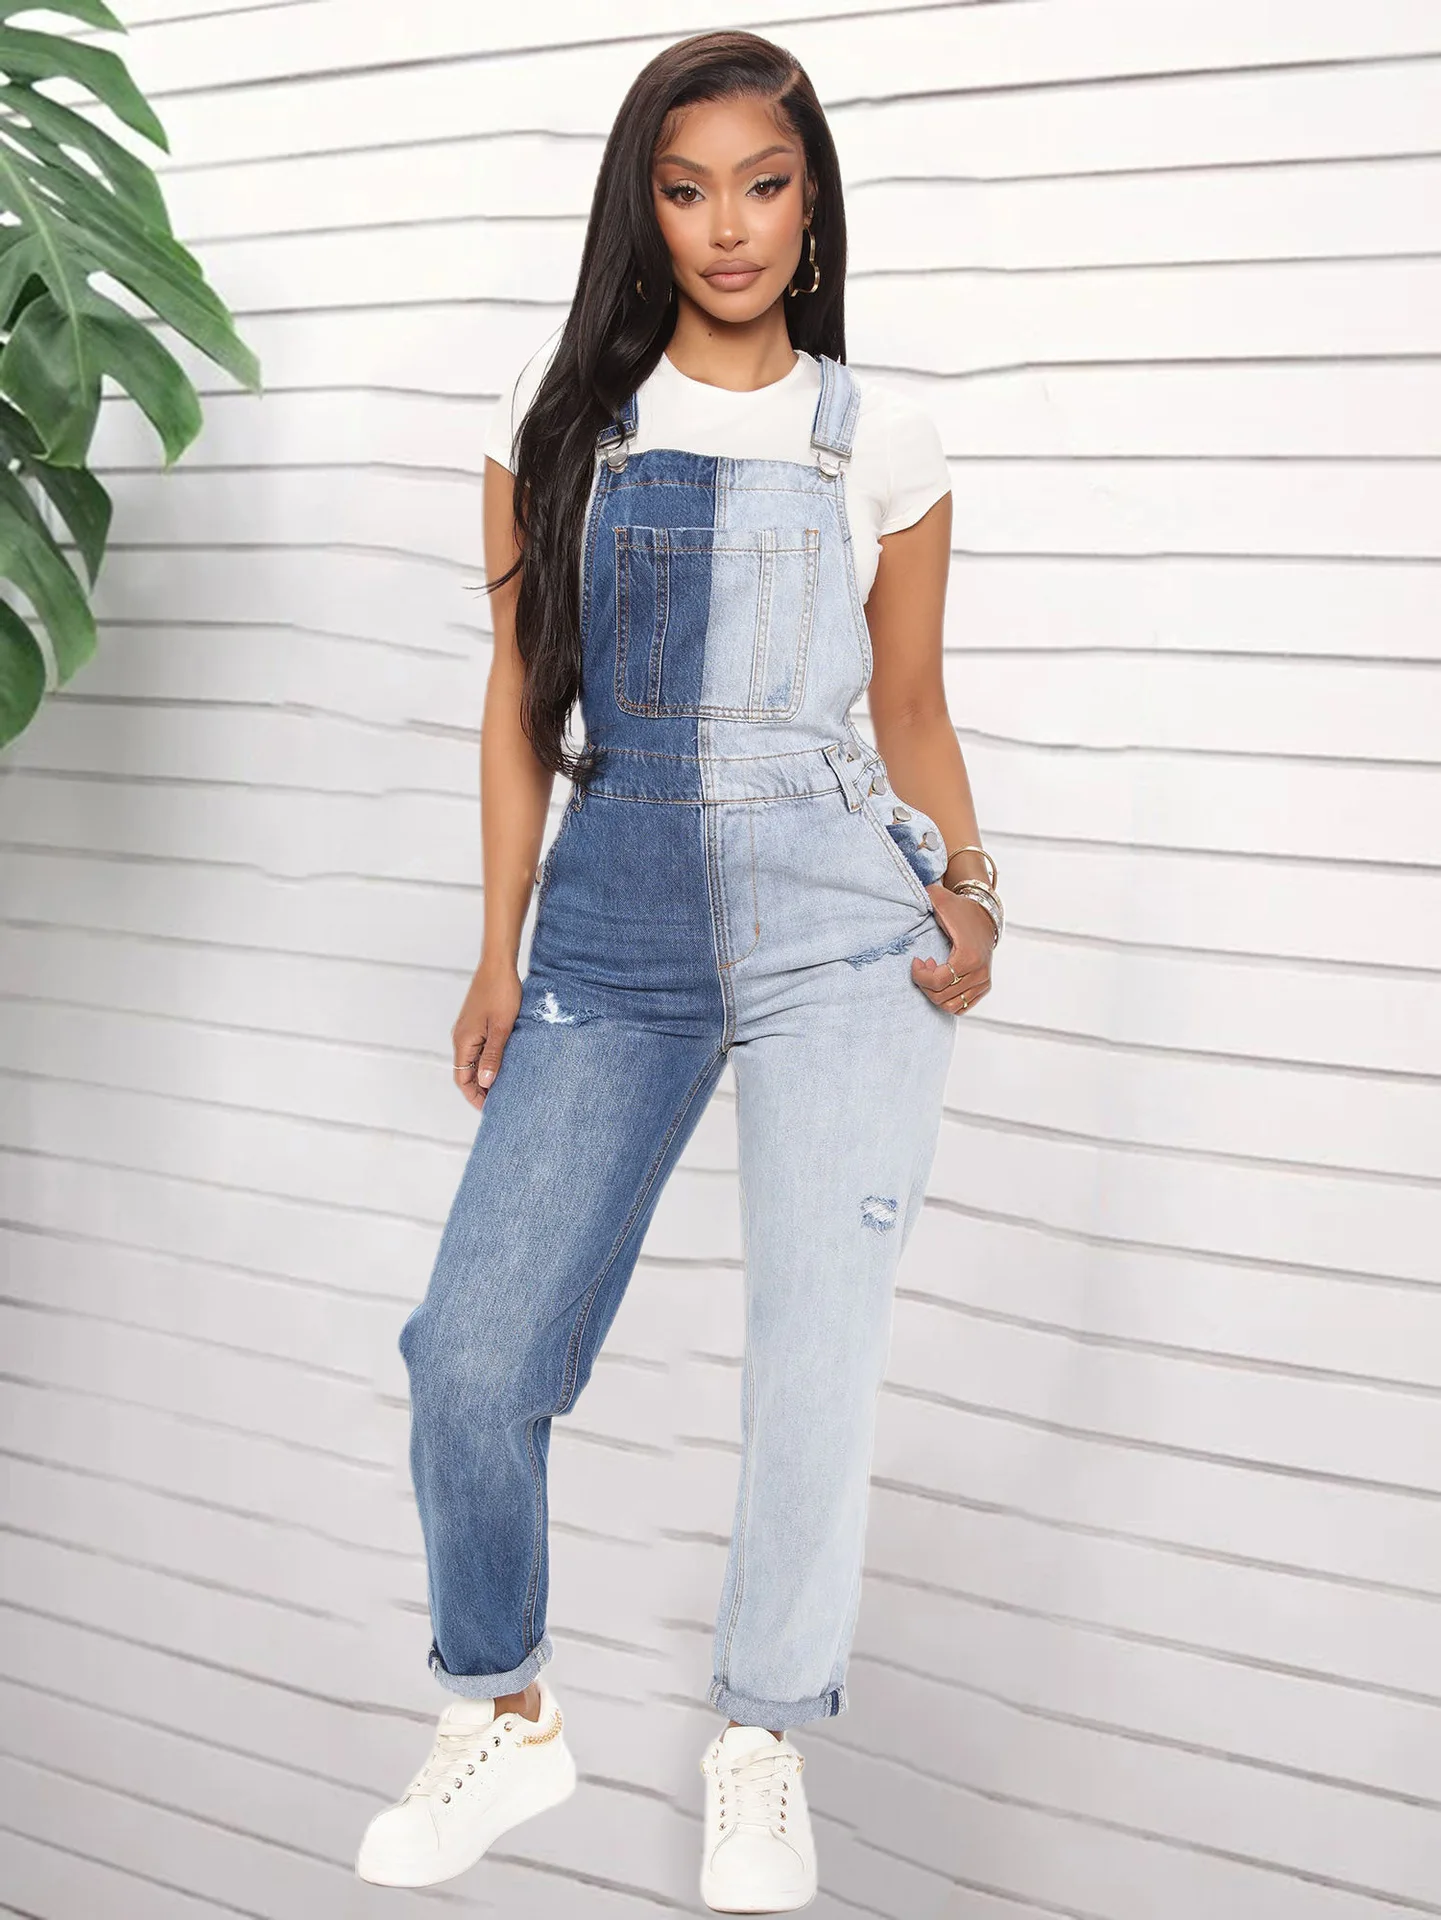 

Summer Sleeveless Lace-up Pockets Rompers 3XL Elegant Playsuit Overalls Casual Women 2022 Fashion Adjusted Straps Denim Jumpsuit